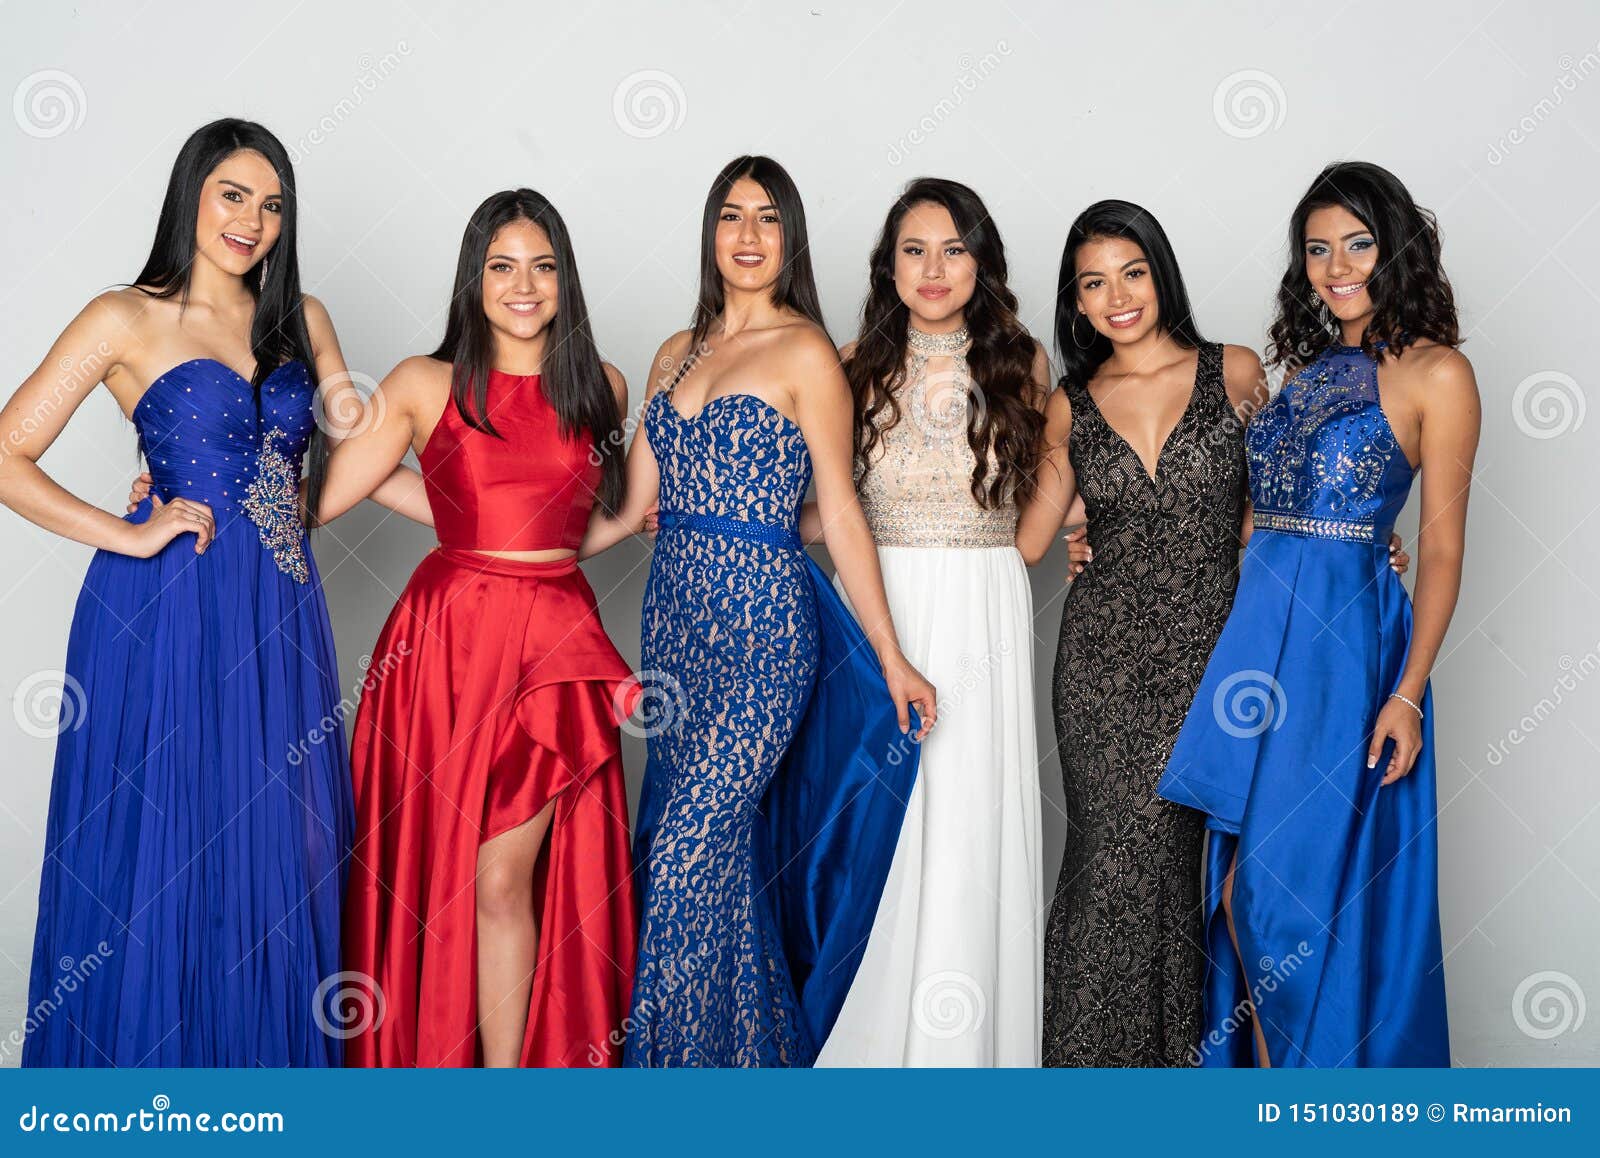 Group of Teen Girls Going To Prom Dance ...